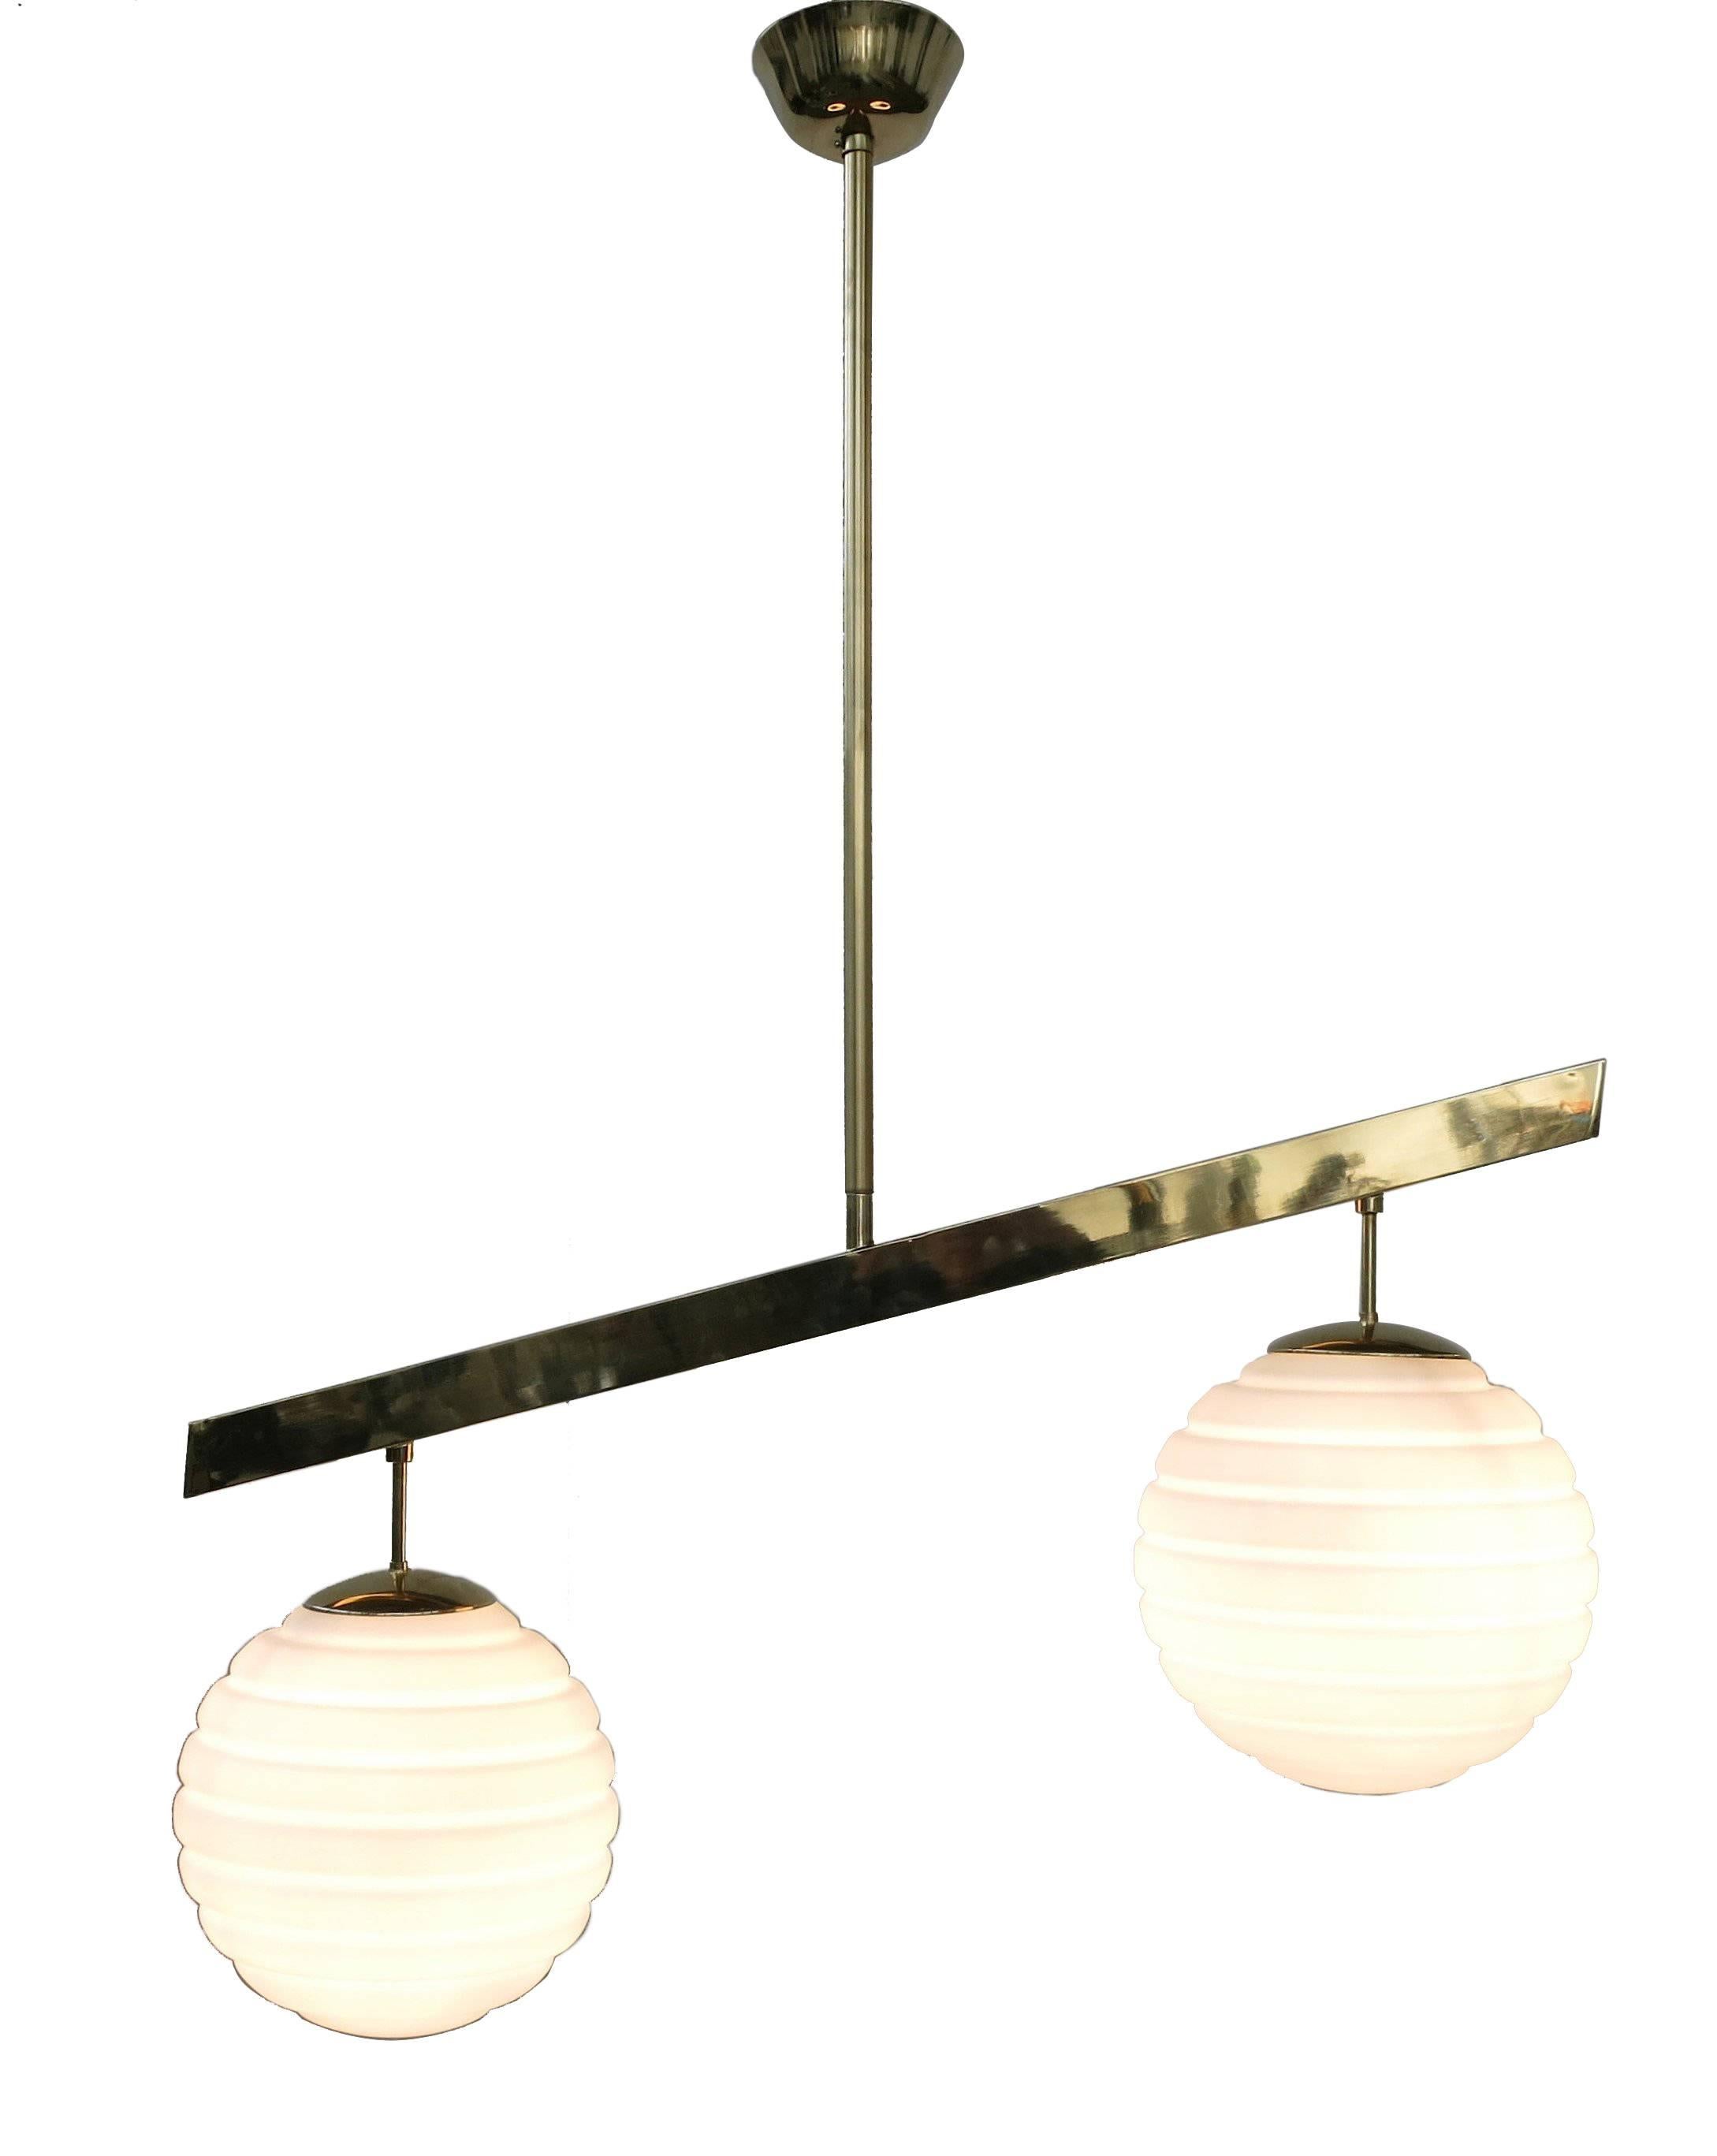 Italian modern pendant with frosted white ribbed Murano glass globes, mounted on polished brass frame / Designed by Fabio Bergomi for Fabio Ltd / Made in Italy 
2 lights / E26 or E27 type / max 60W each  
Height: 52 inches / Width: 39.5 inches /